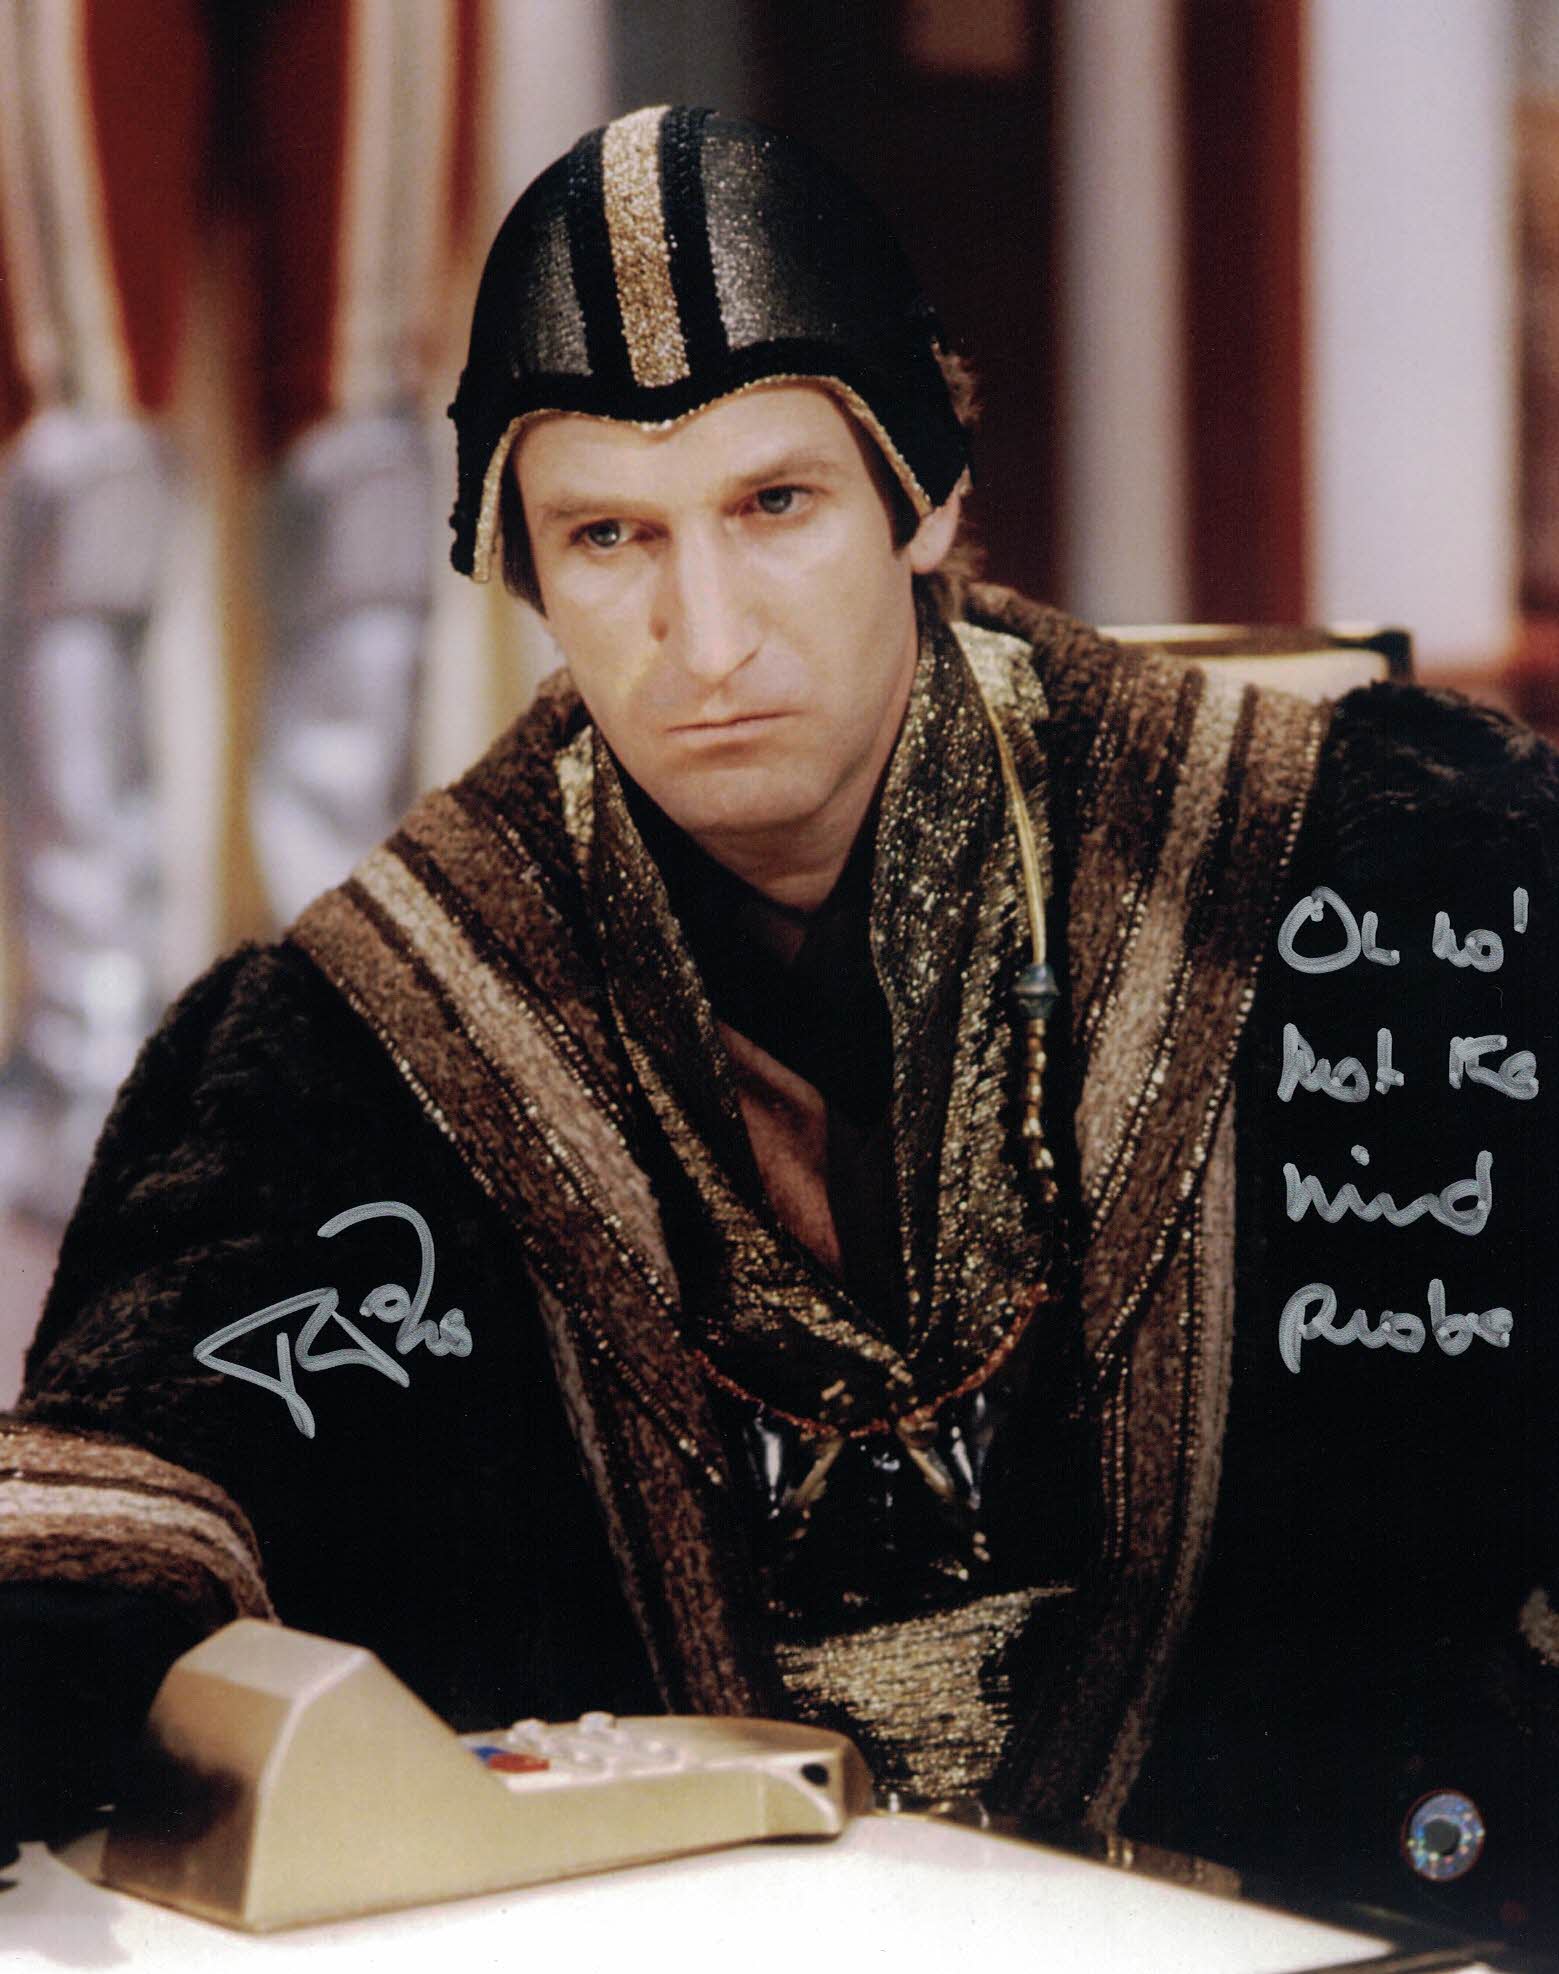 PAUL JERRICHO - The Castellan in Doctor Who - hand signed photo